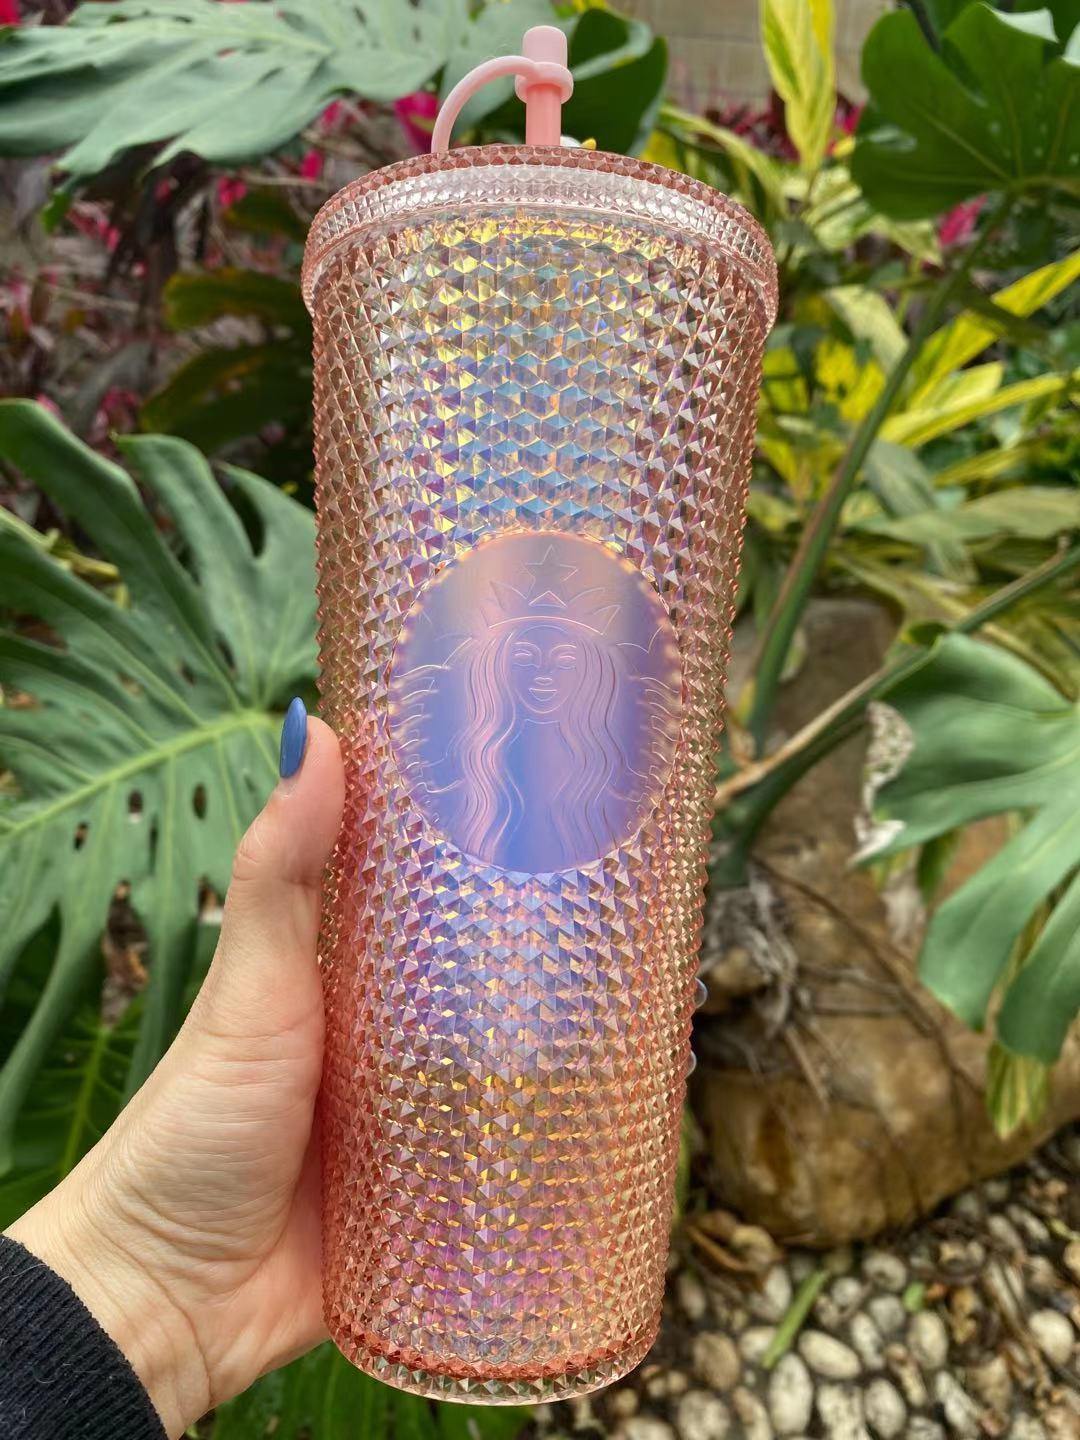 Starbucks 2021 China Year Of The Ox Coral Pink Diamond Studded Straw Cup 25oz Tumbler - Yvonne12785